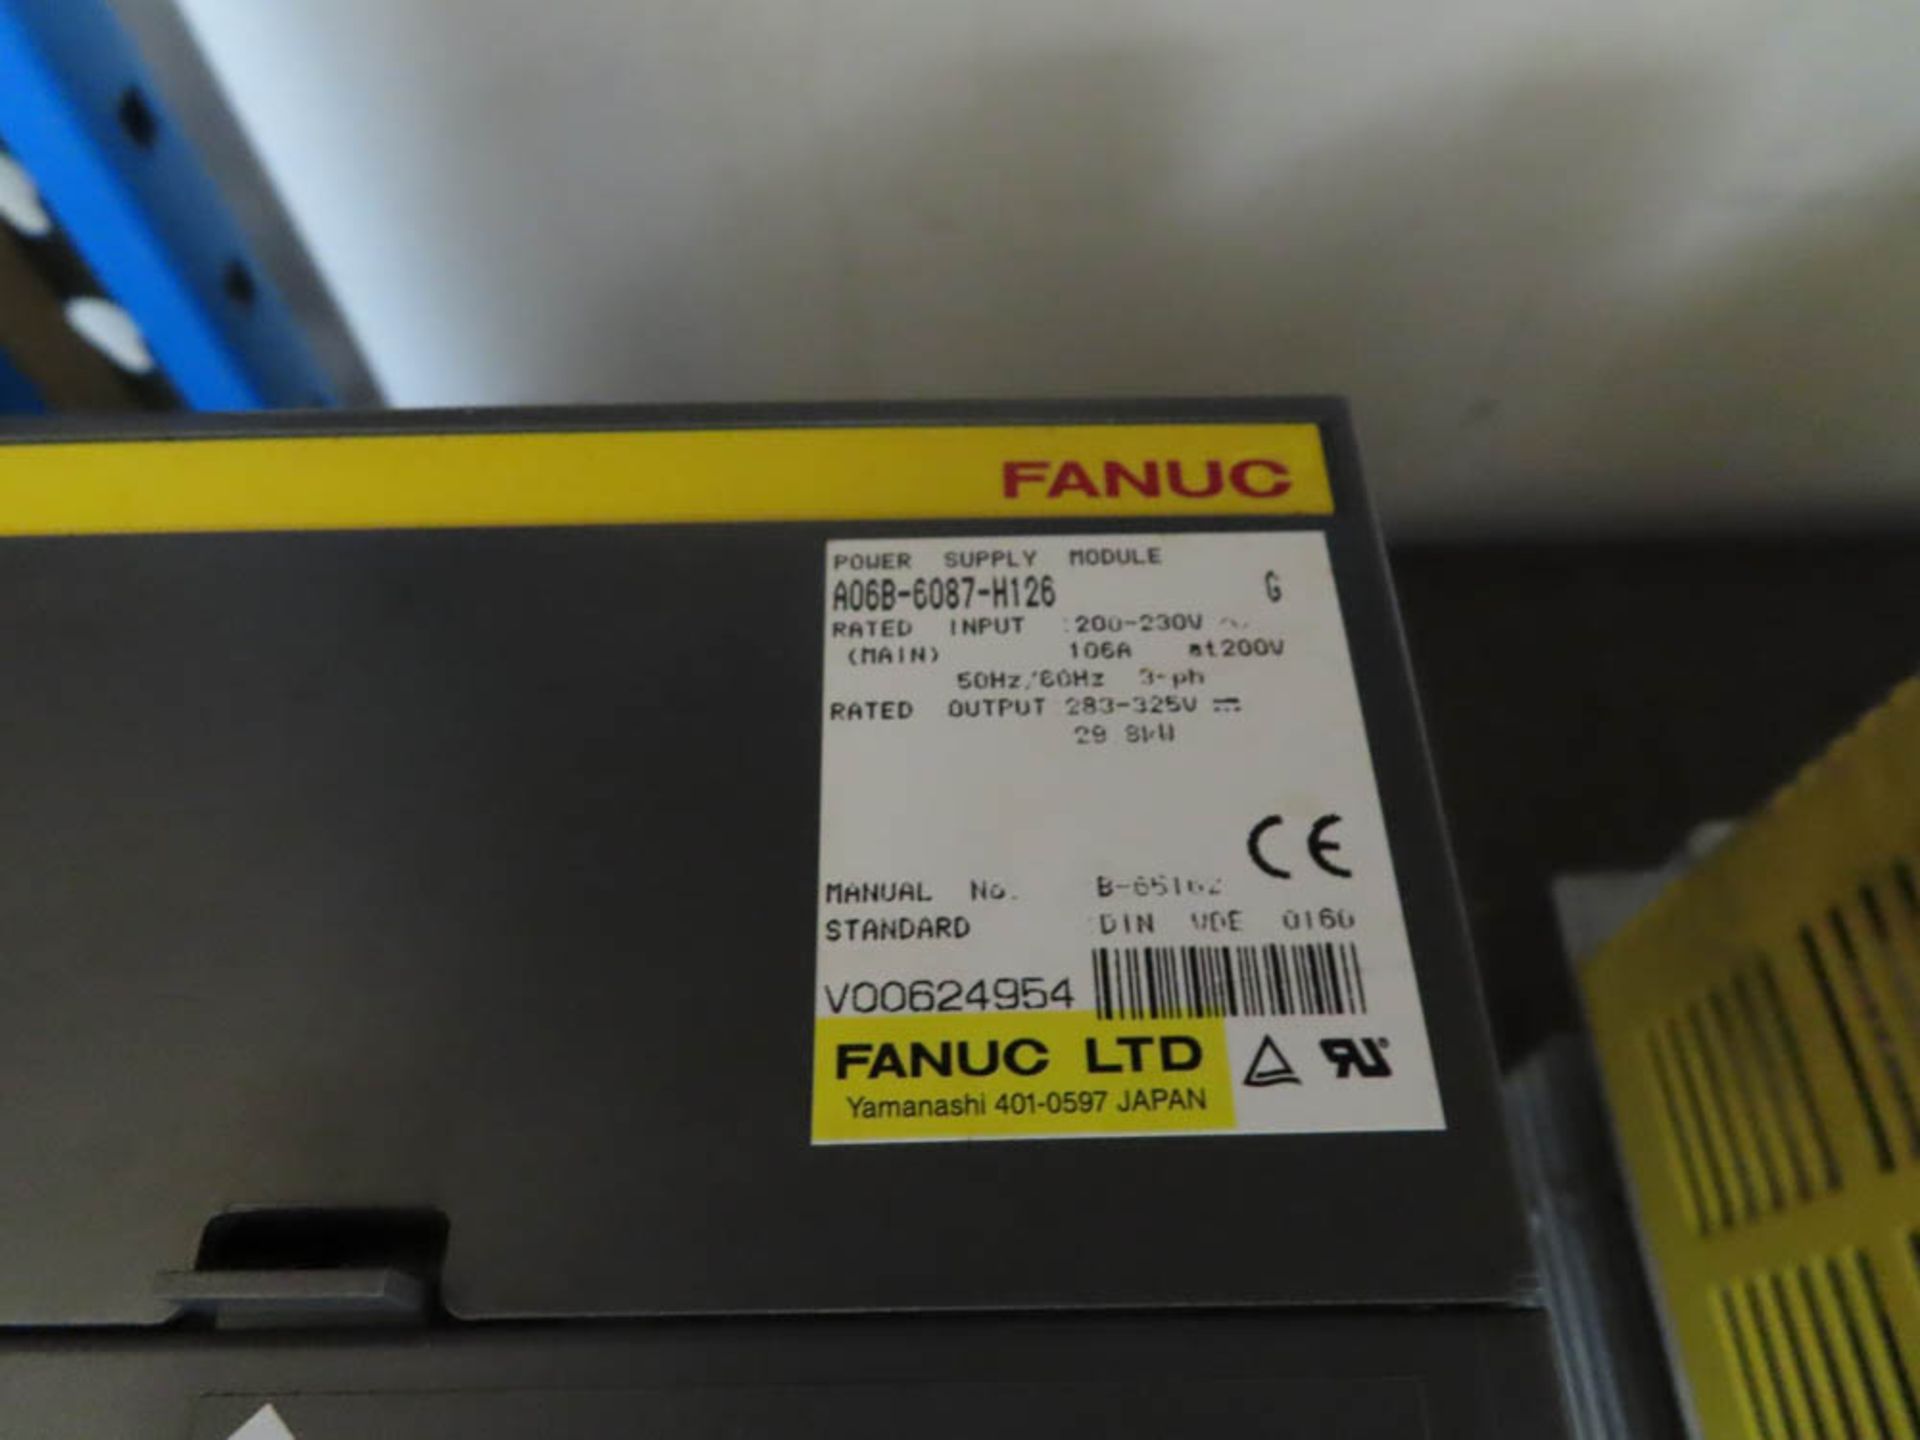 FANUC POWER SUPPLY MODULE A068-6087-H126 - Image 2 of 2